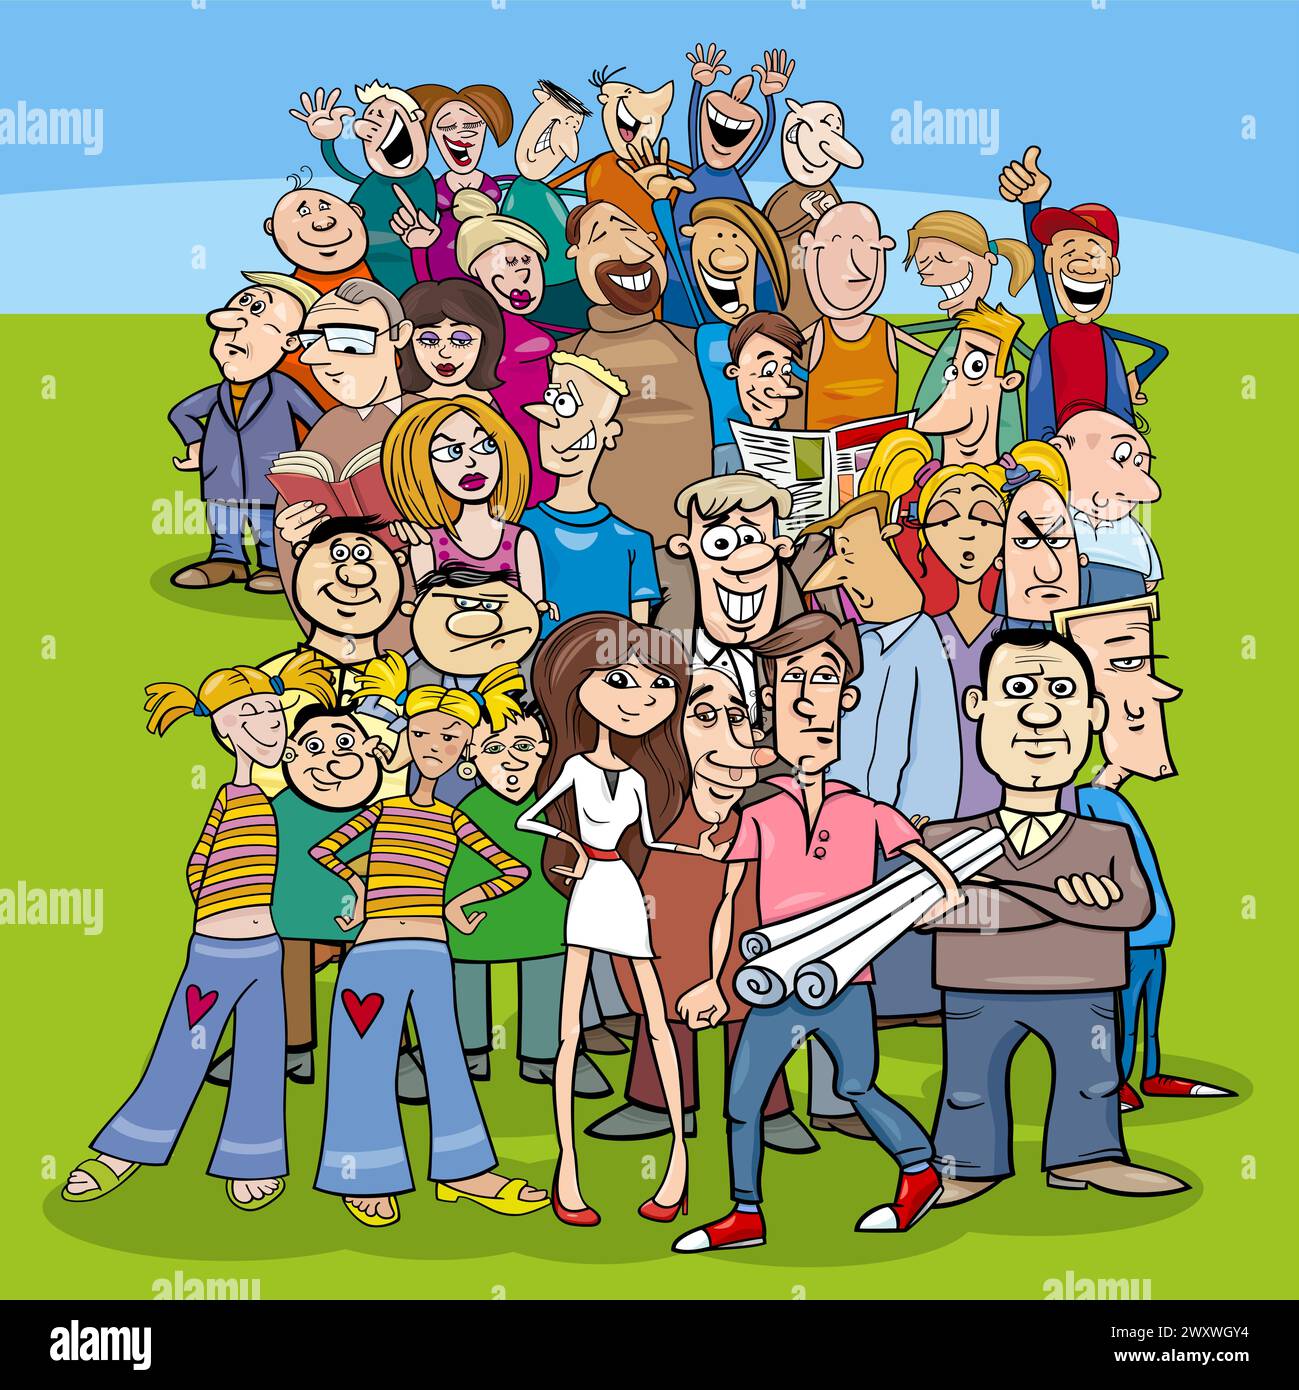 Cartoon illustration of people characters in the crowd Stock Vector